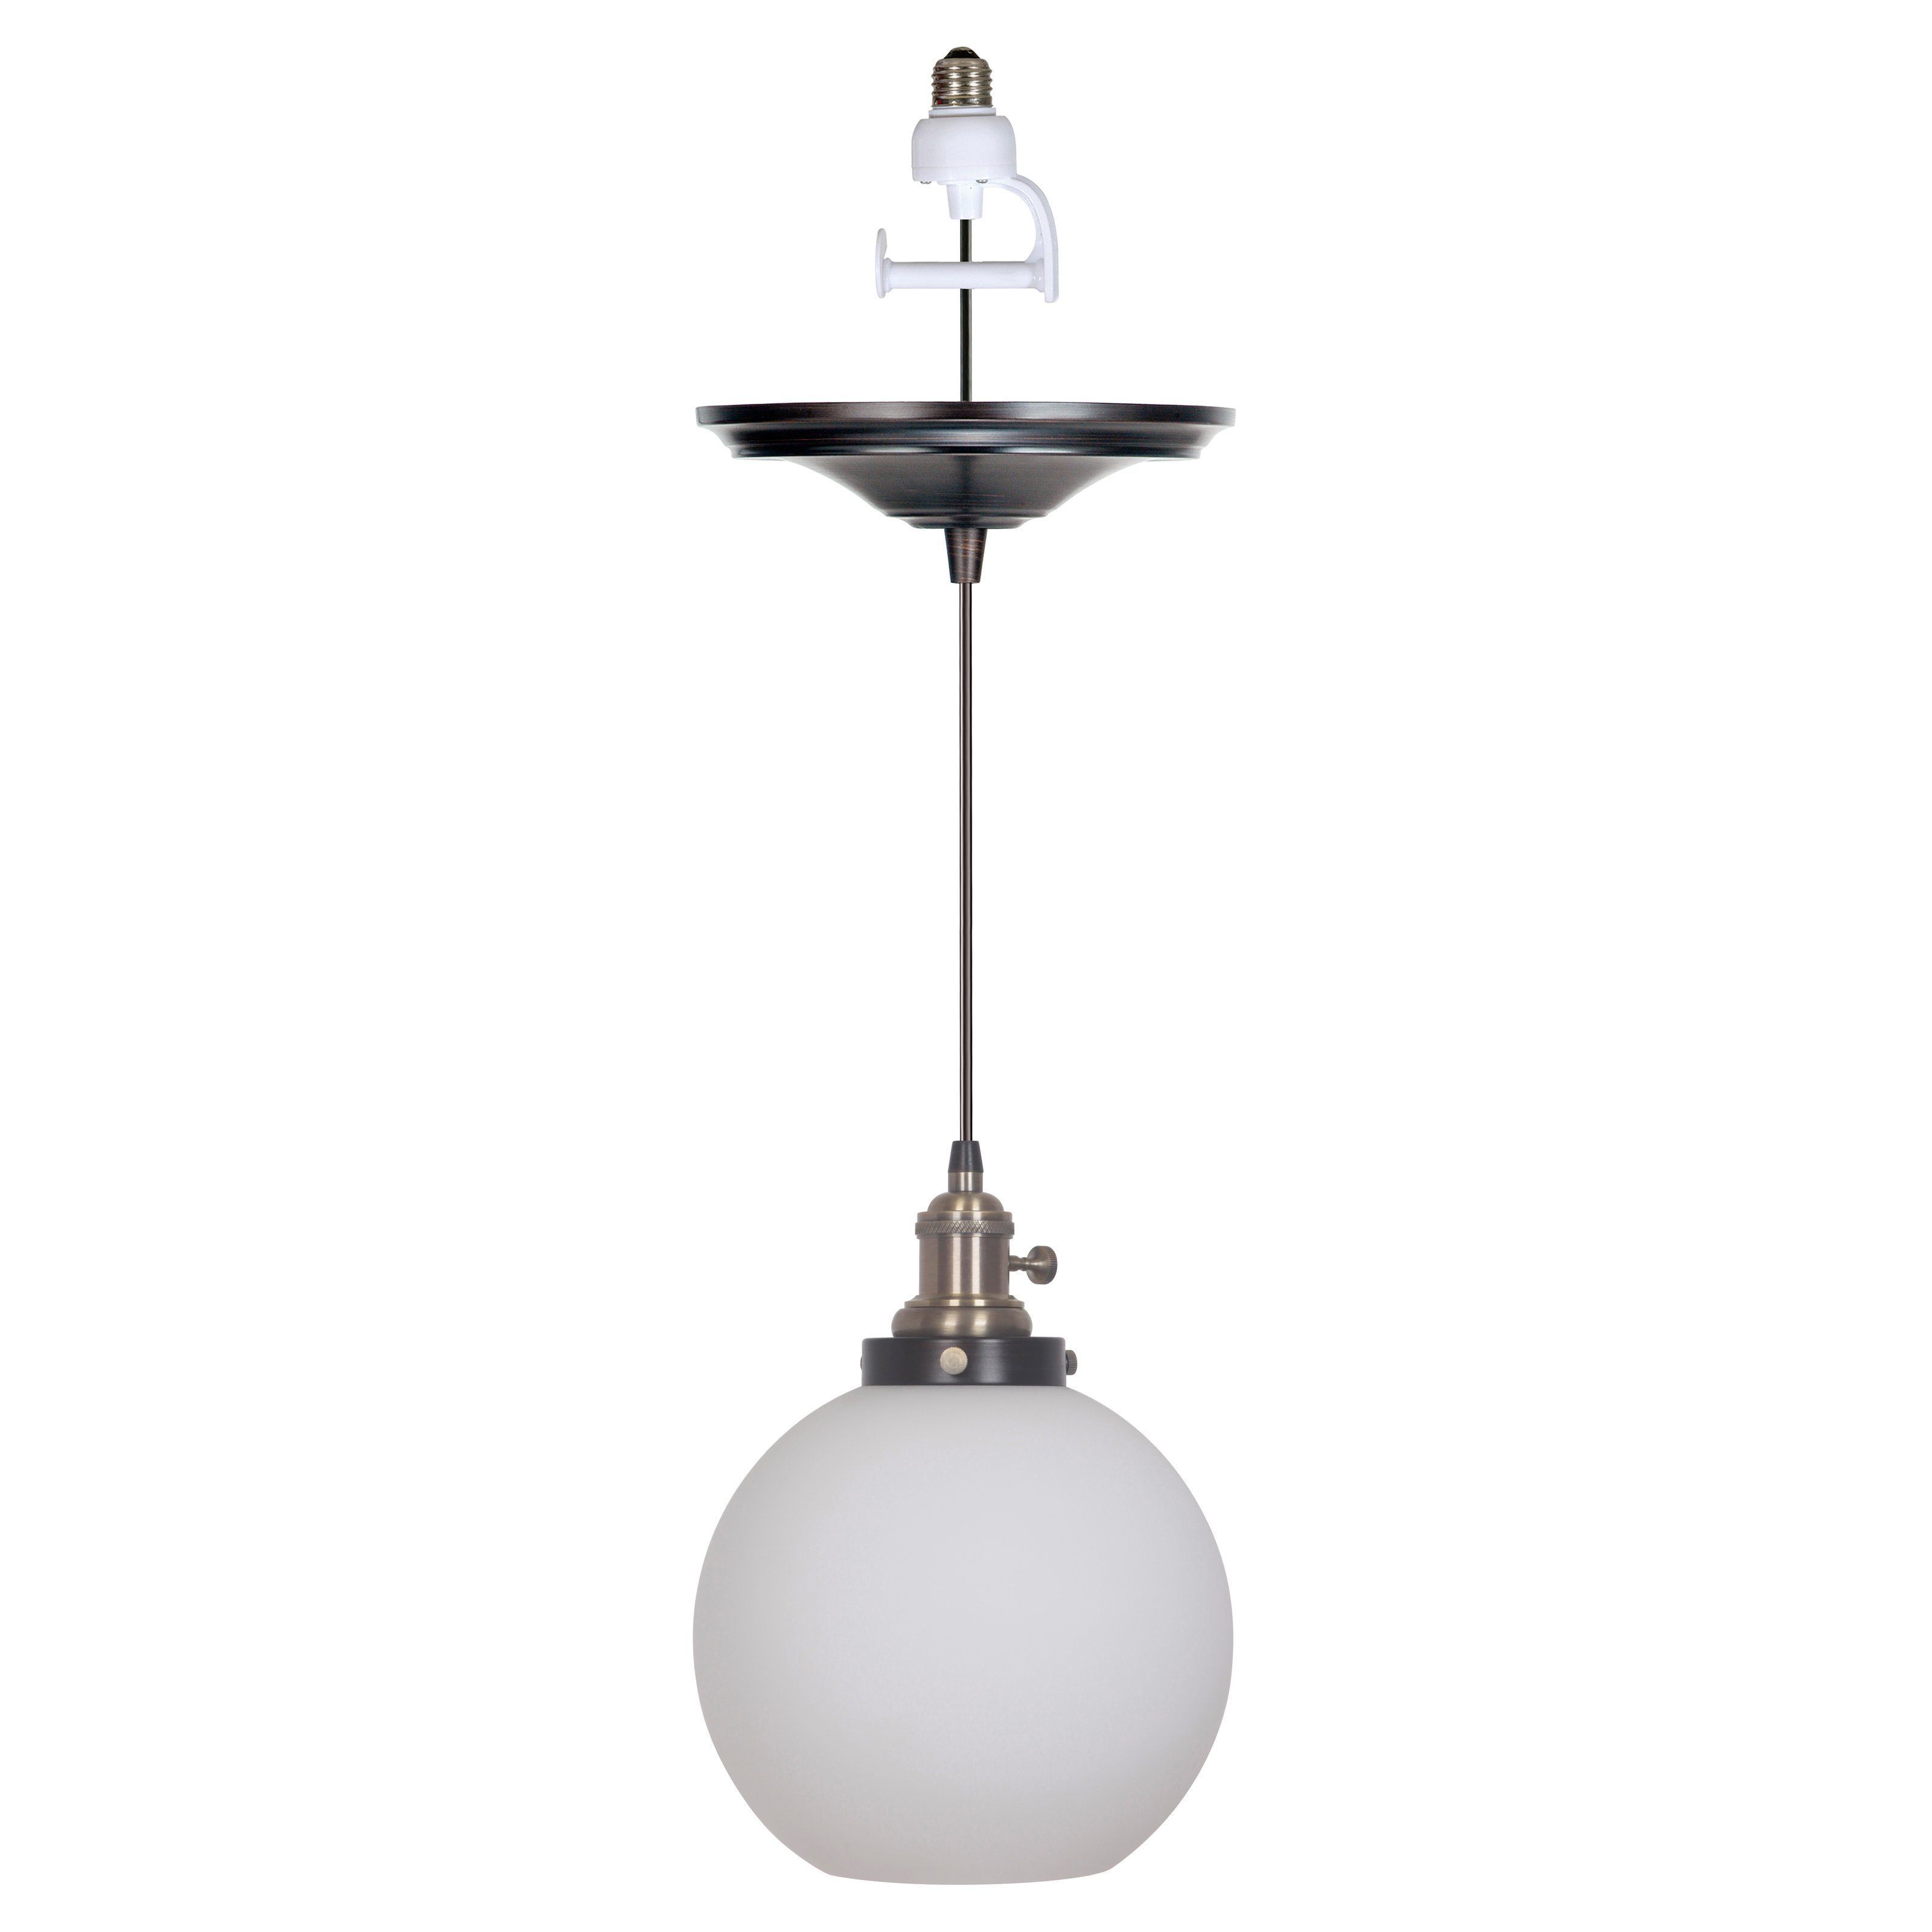 Worth Home Products Instant Screw In Pendant Light With In Bautista 1 Light Single Globe Pendants (View 11 of 30)